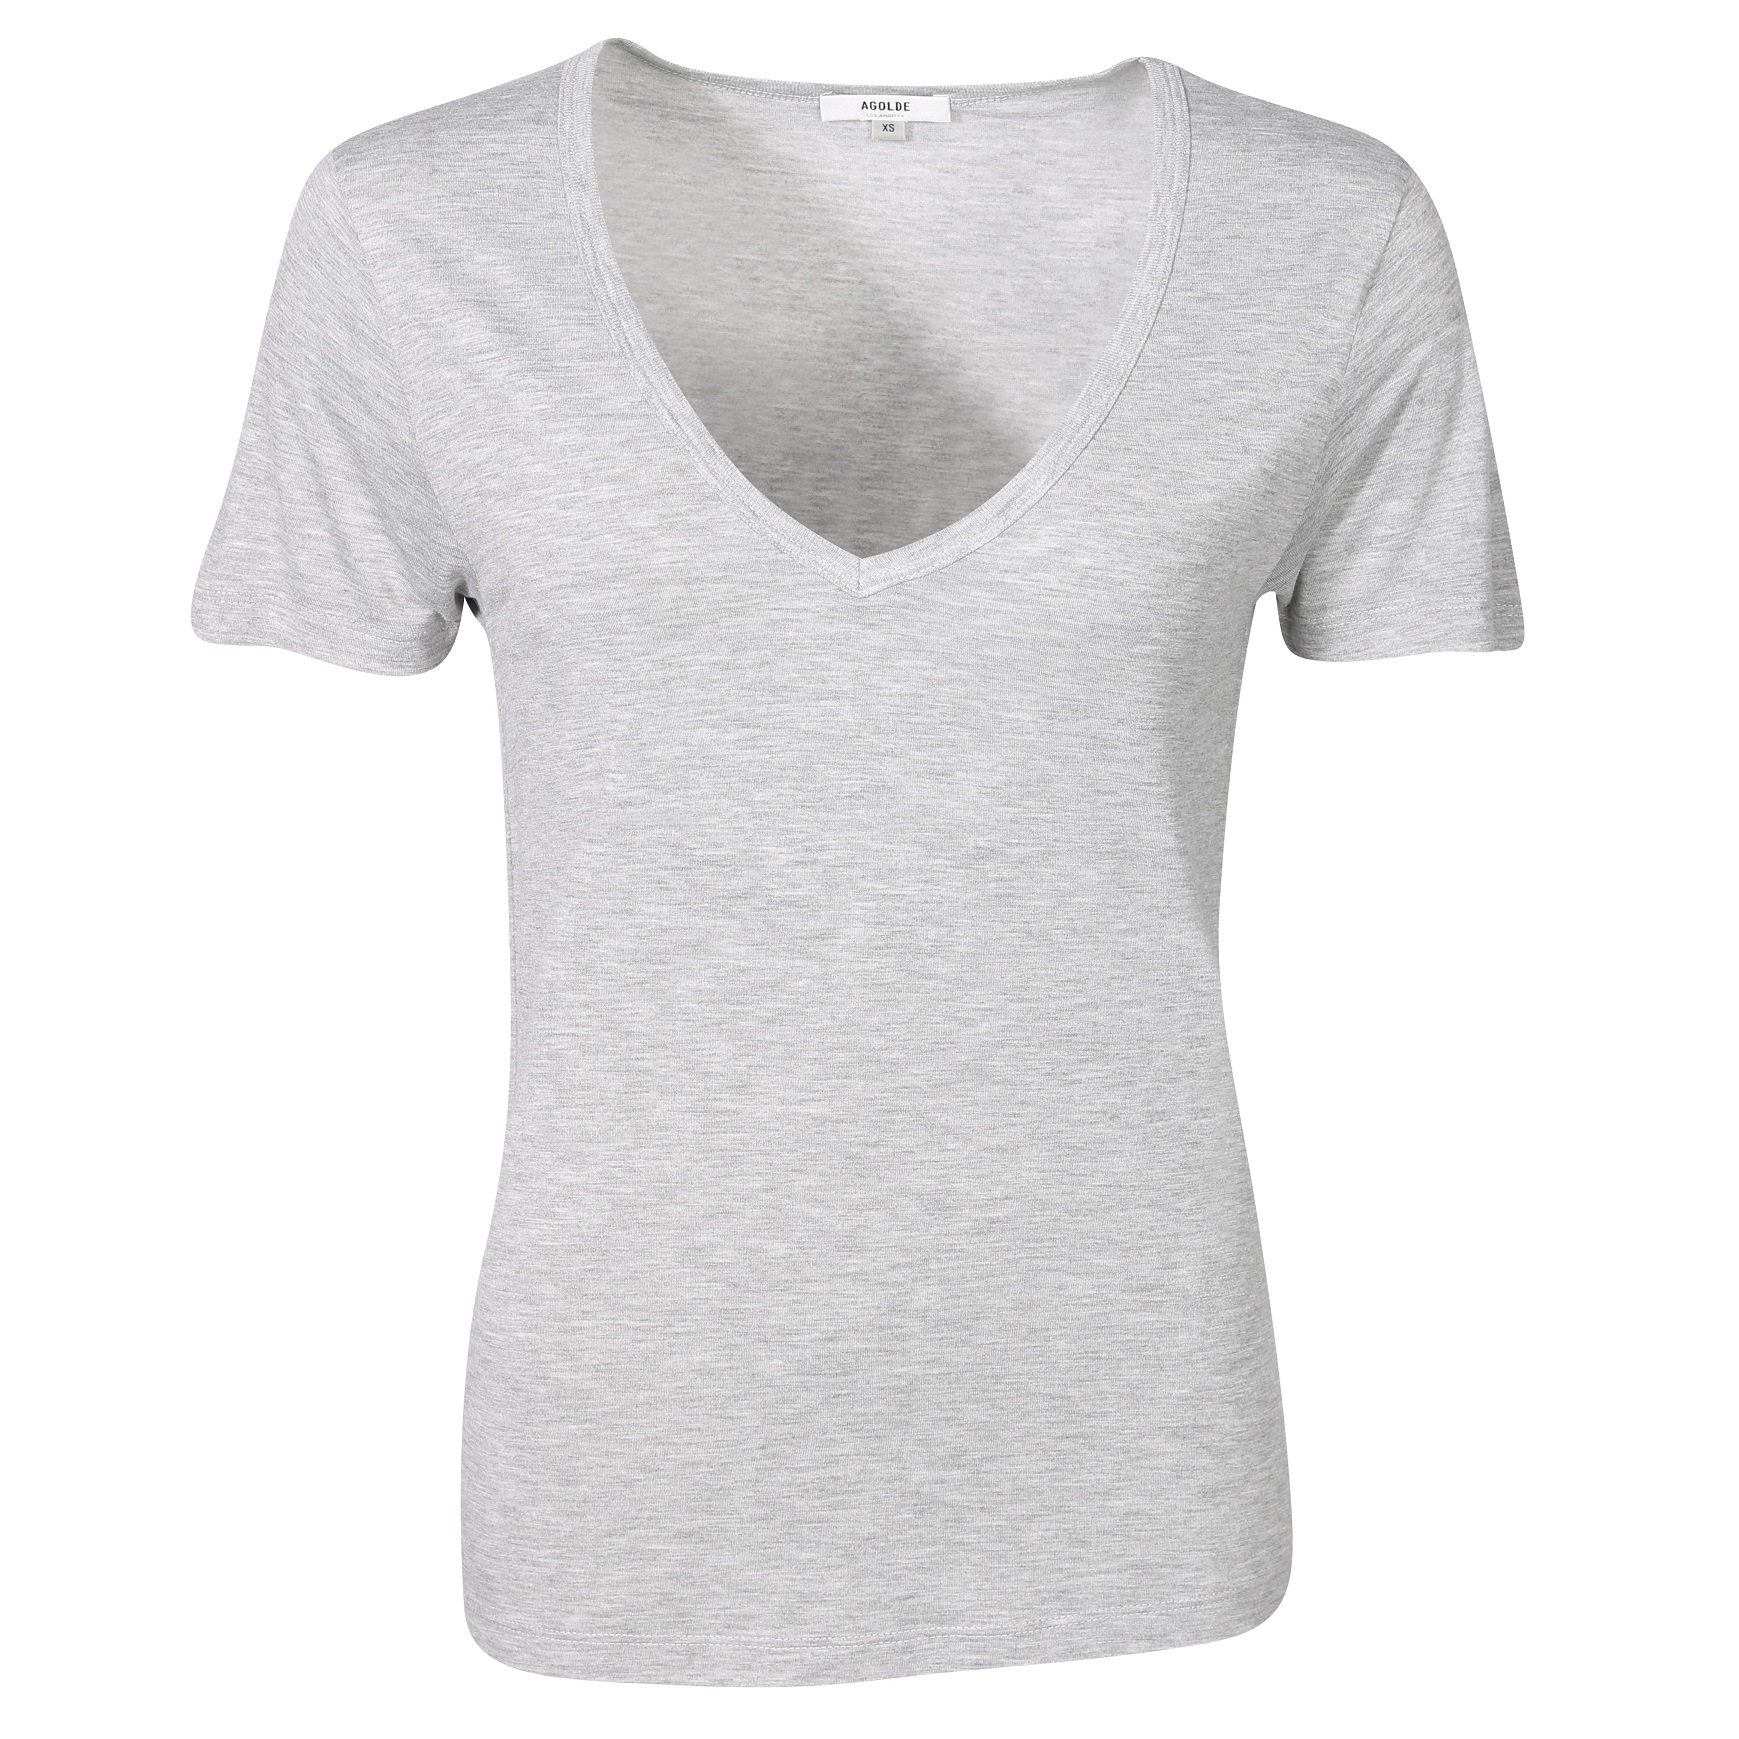 AGOLDE Cameron V-Neck Tee in Heather Grey M